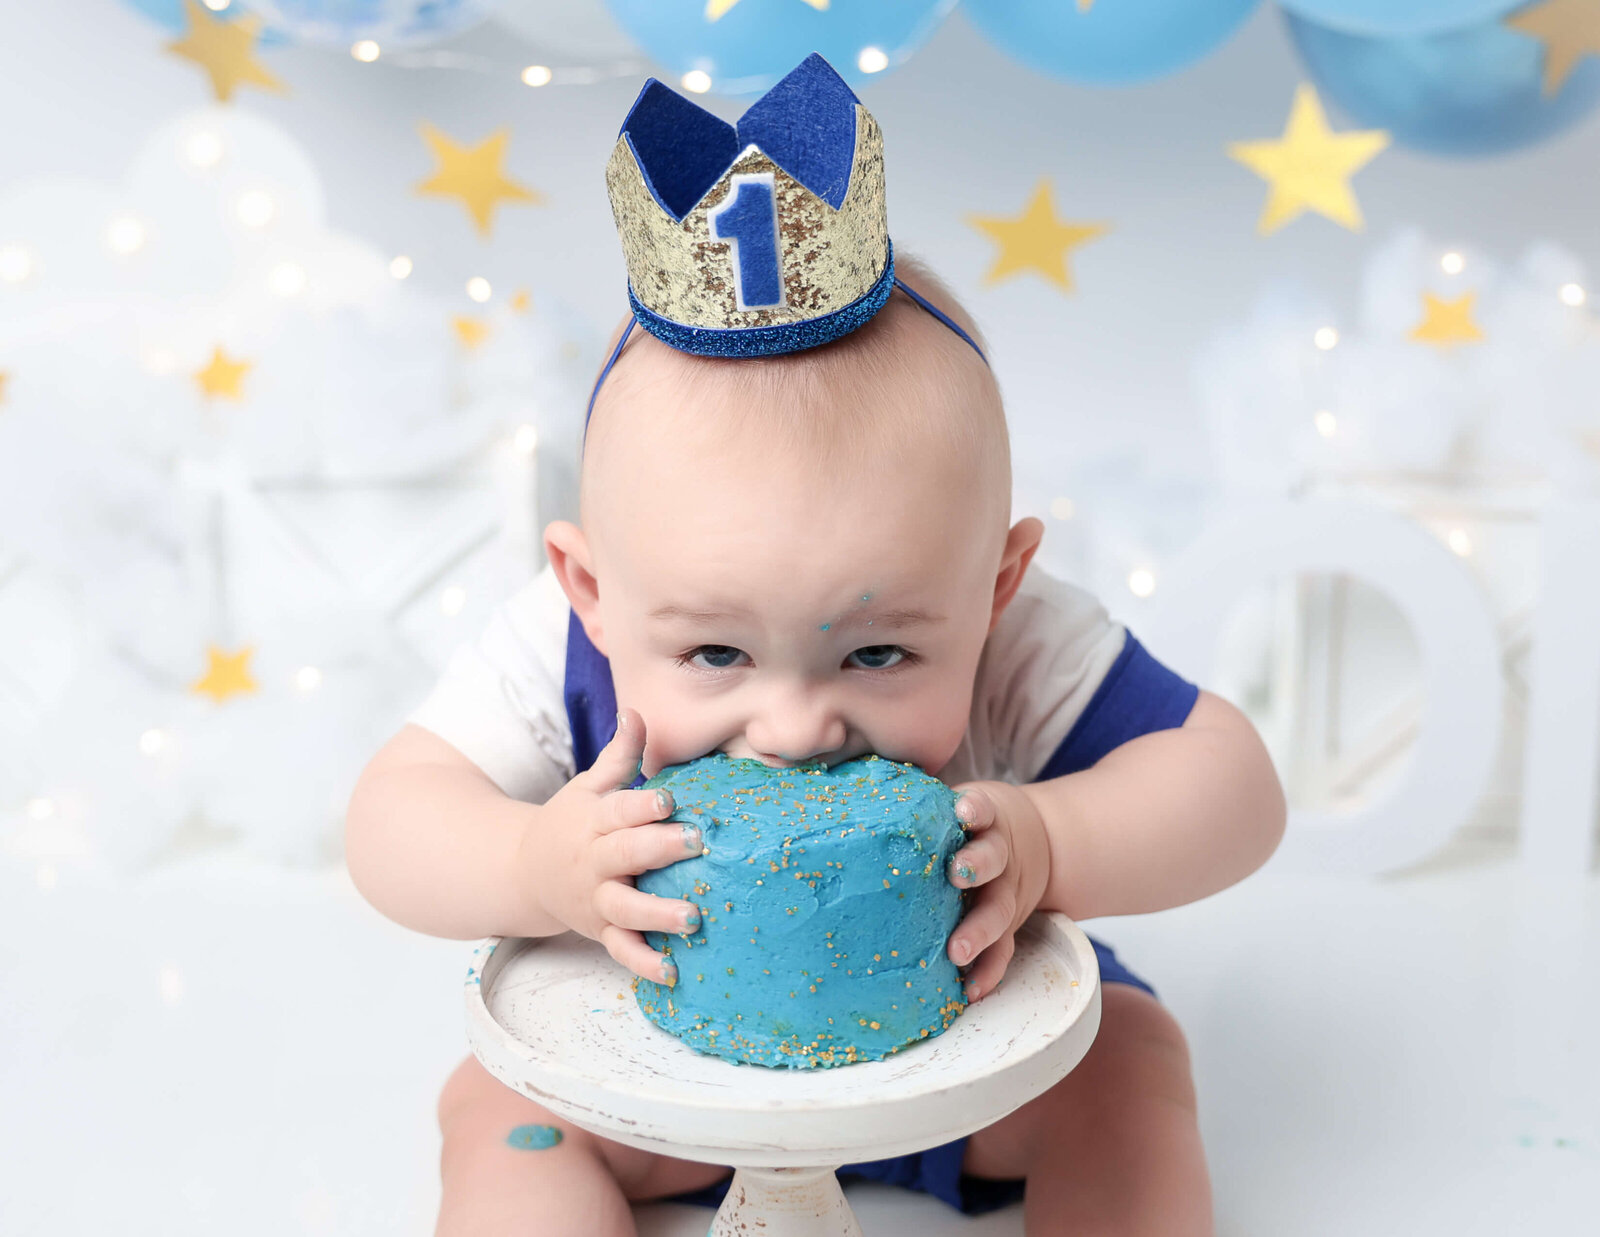 One year old boy cake smash session in our Rochester, Ny studio.